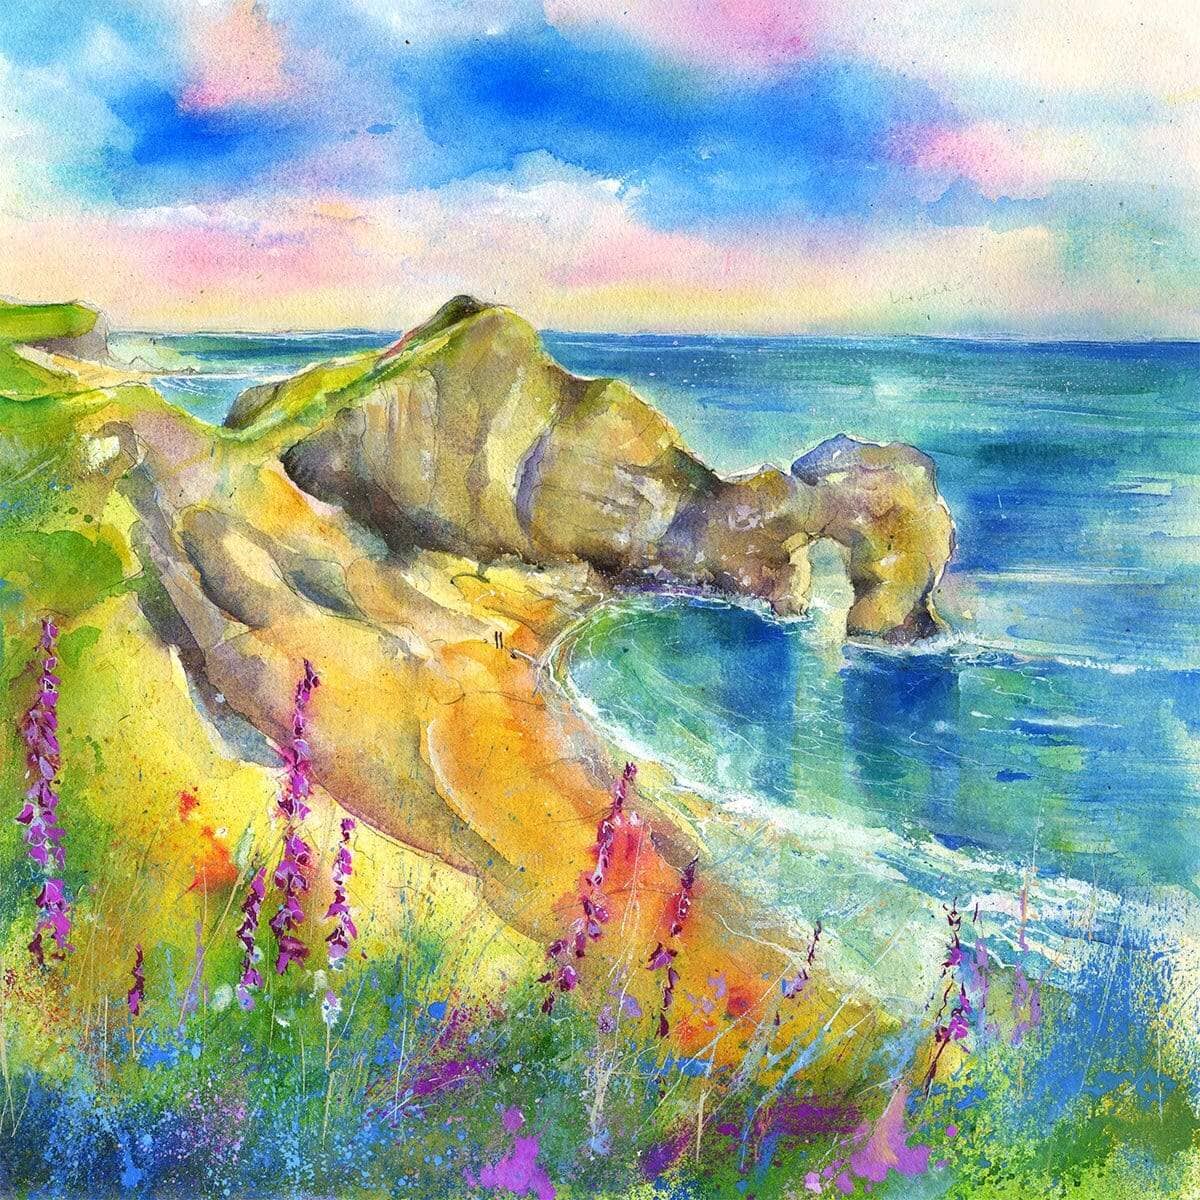 Durdle Door, Dorset Greeting Card designed by artist Sheila Gill
